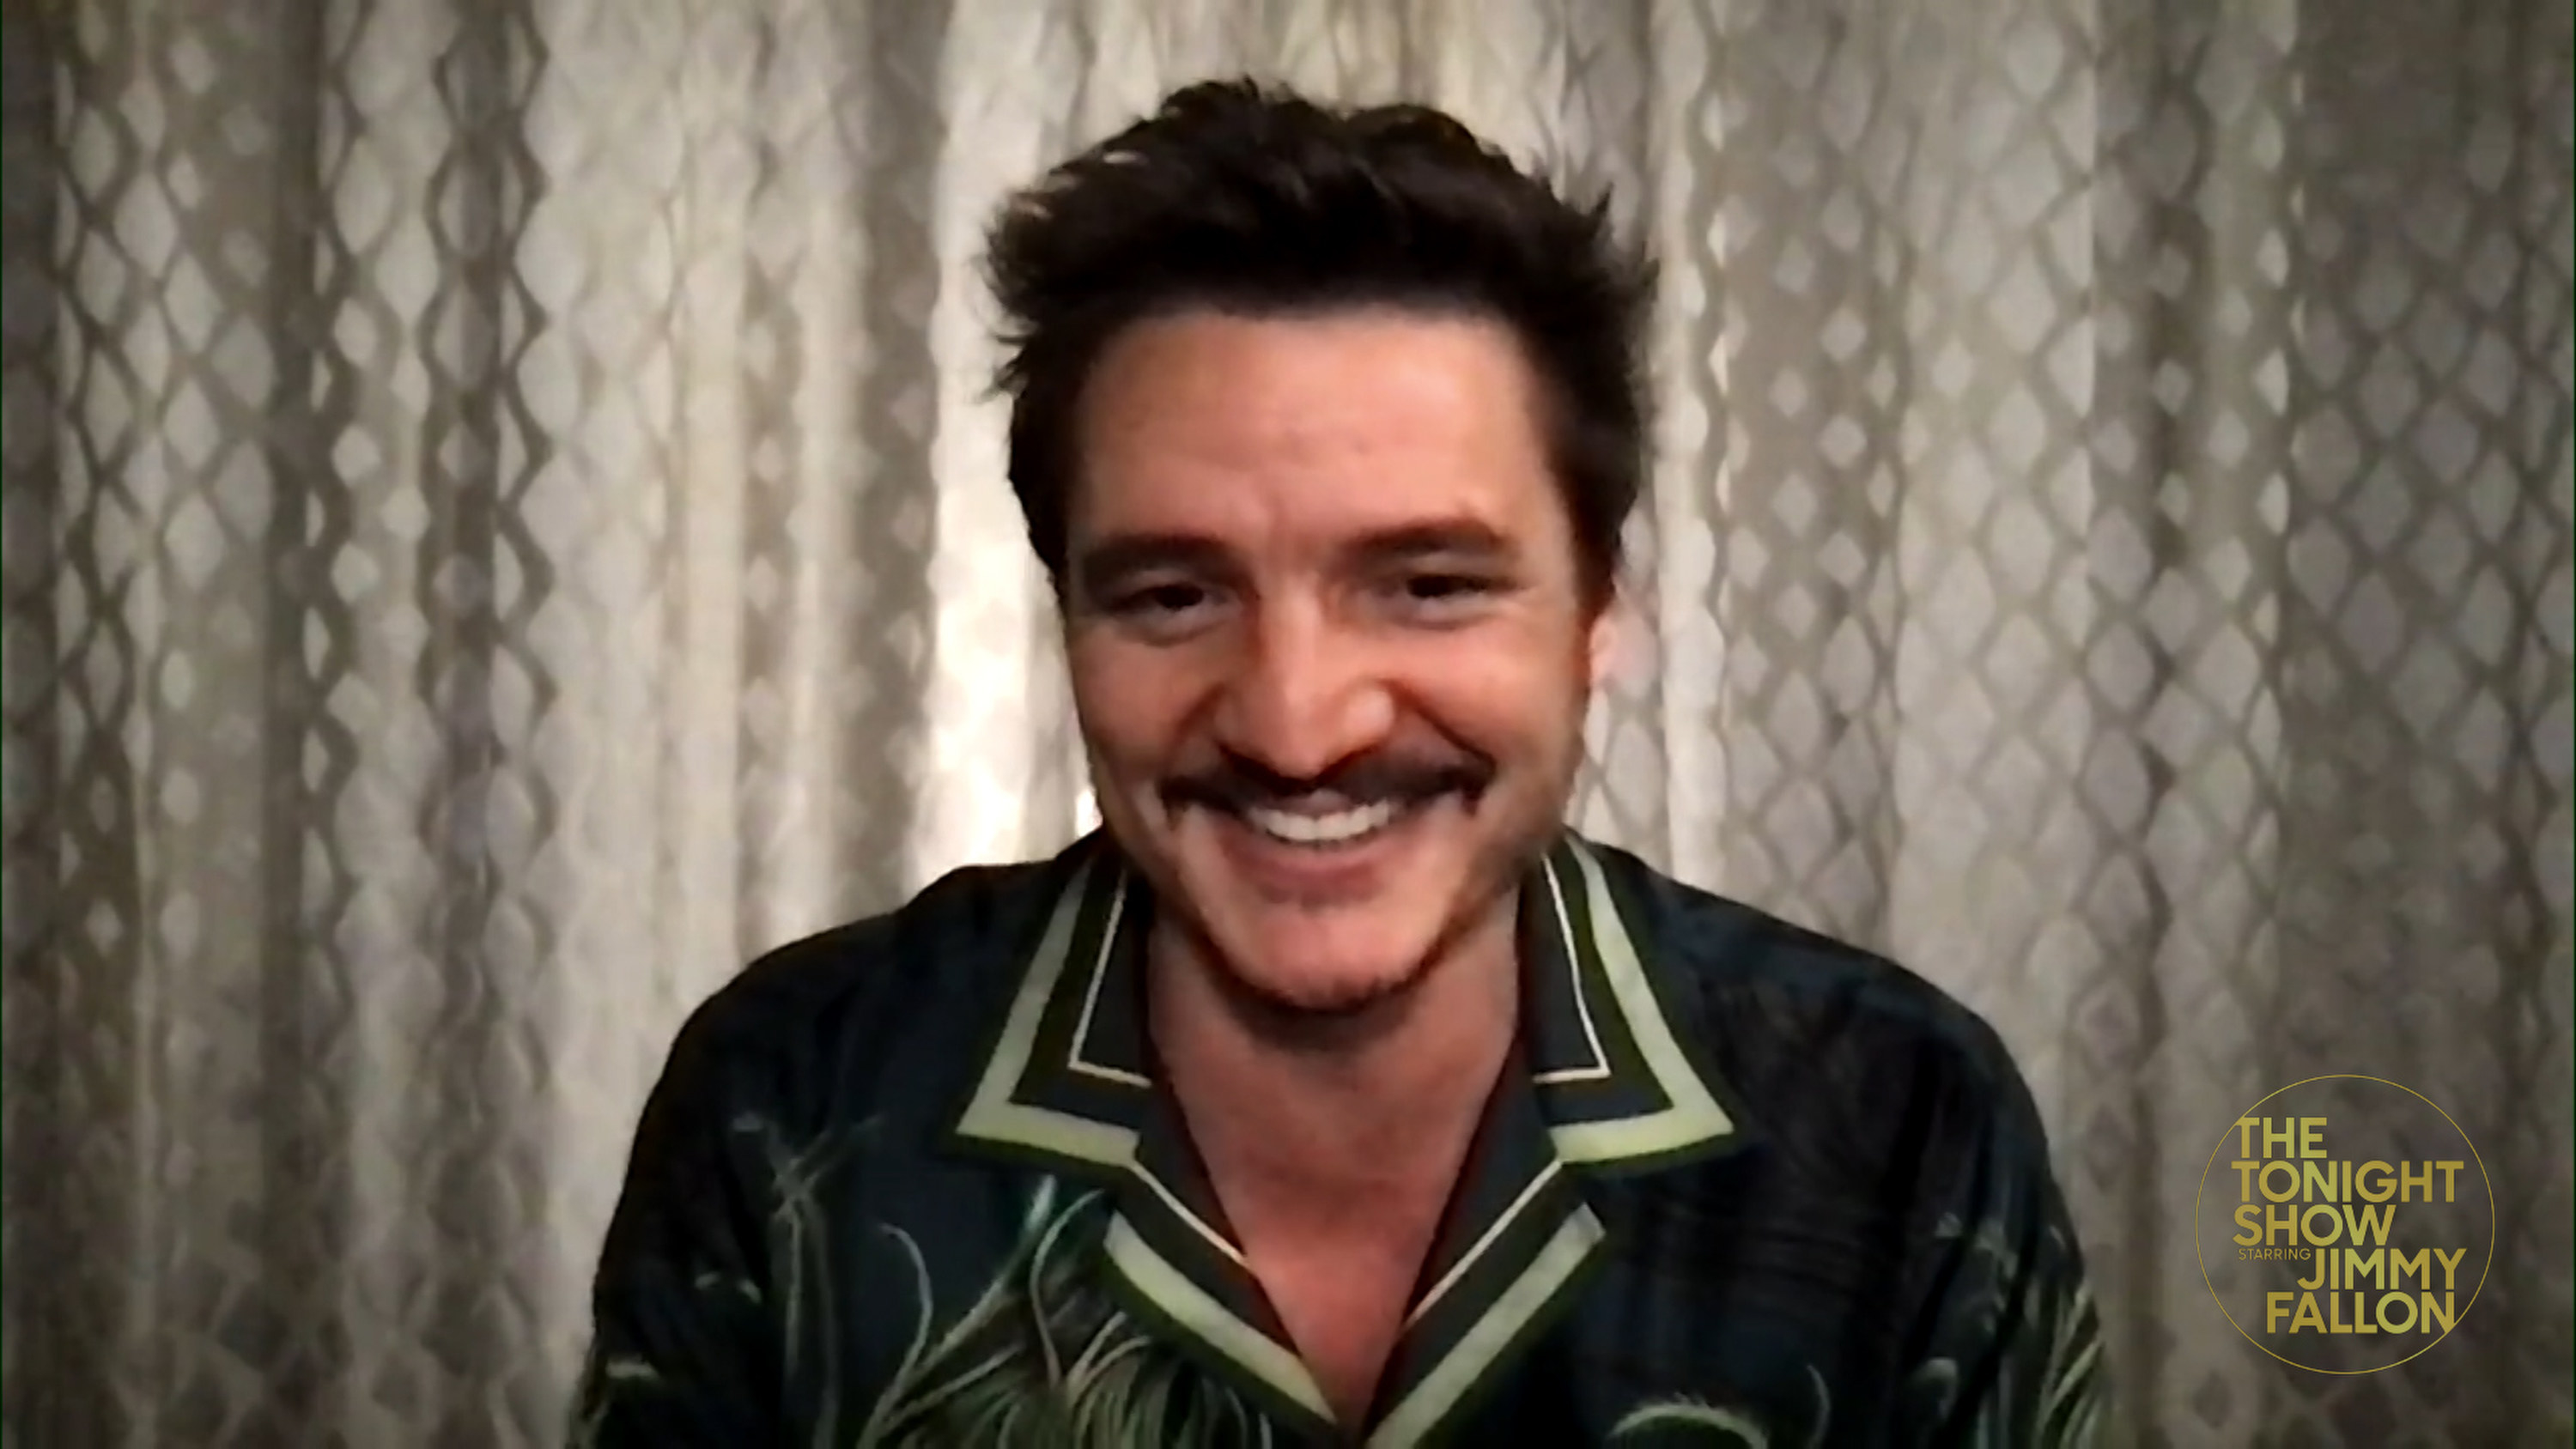 Pedro Pascal in a green button up doing a Zoom interview with Jimmy Fallon